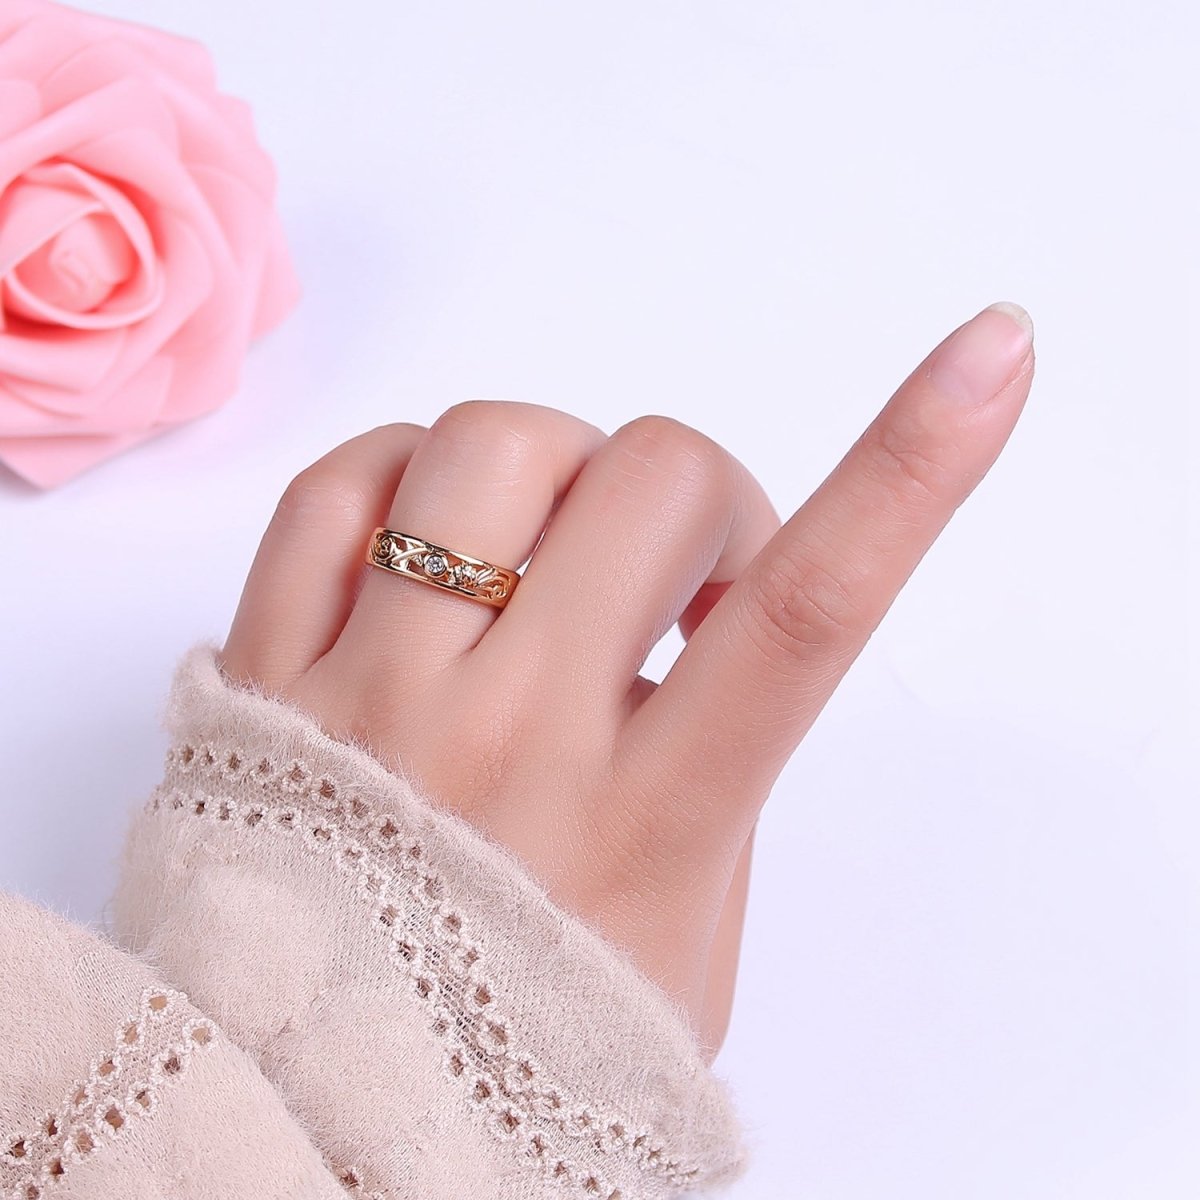 Dainty Gold Ring Carved Art with Round Bezel Cut Cz Stone O-2082 - DLUXCA